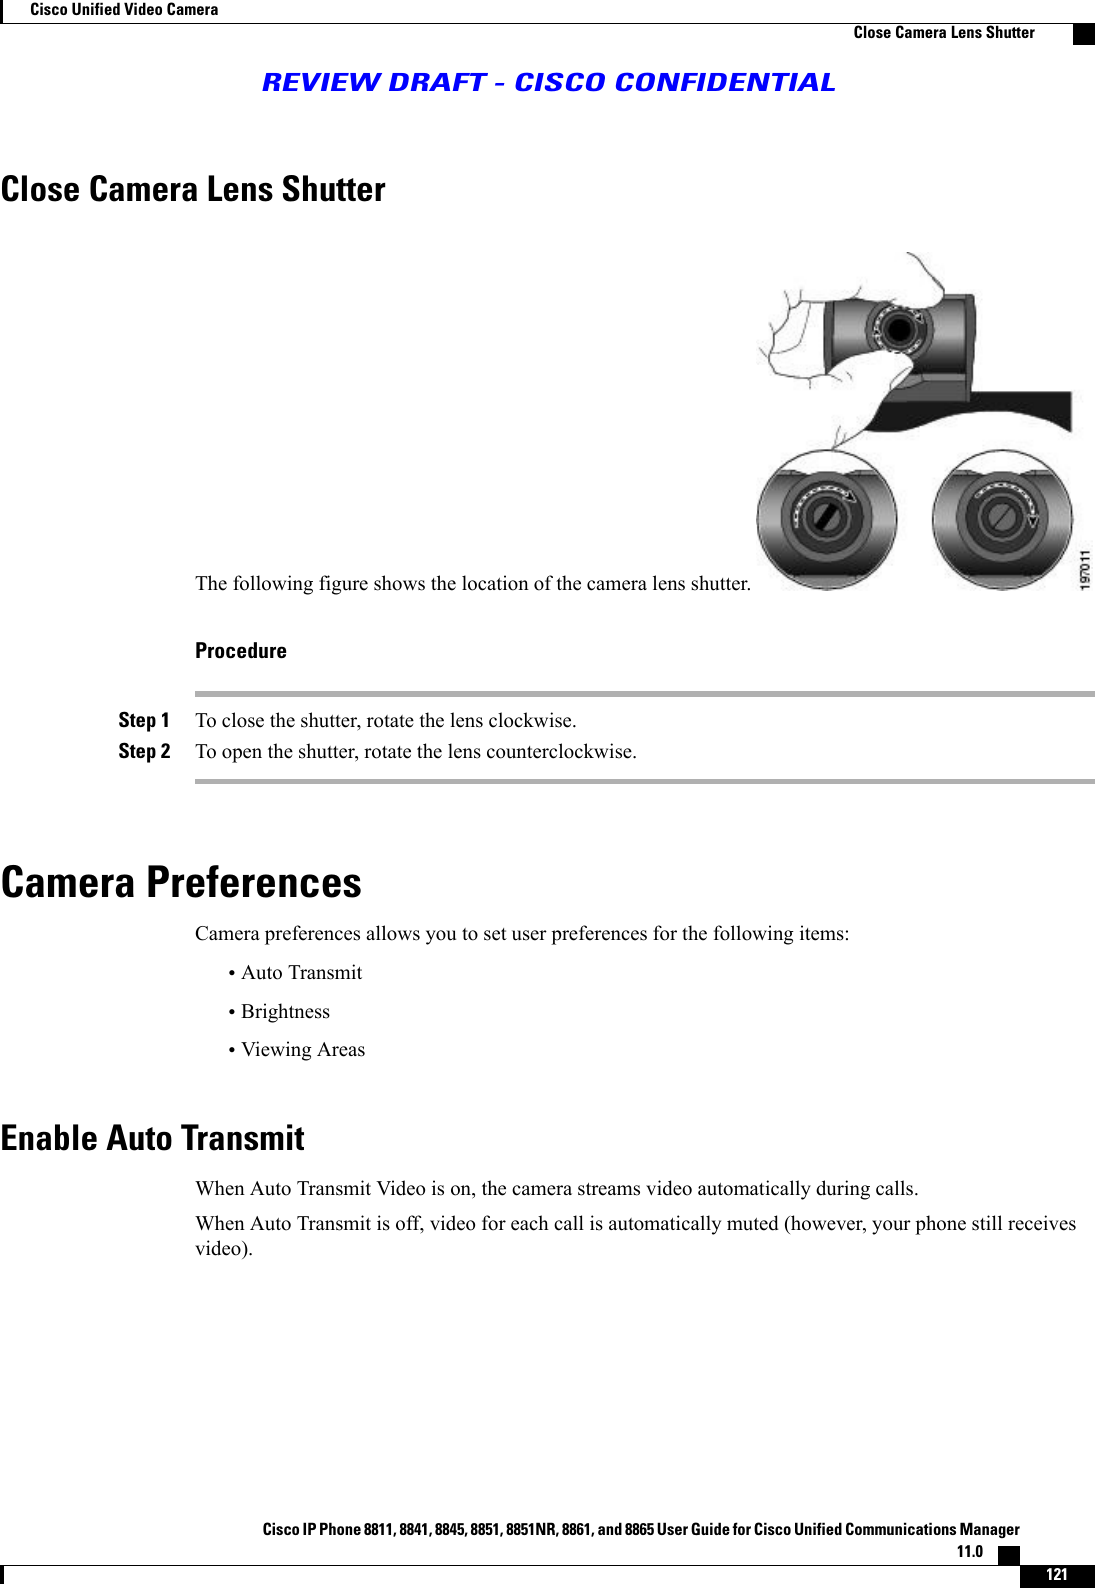 Close Camera Lens ShutterThe following figure shows the location of the camera lens shutter.ProcedureStep 1 To close the shutter, rotate the lens clockwise.Step 2 To open the shutter, rotate the lens counterclockwise.Camera PreferencesCamera preferences allows you to set user preferences for the following items:•Auto Transmit•Brightness•Viewing AreasEnable Auto TransmitWhen Auto Transmit Video is on, the camera streams video automatically during calls.When Auto Transmit is off, video for each call is automatically muted (however, your phone still receivesvideo).Cisco IP Phone 8811, 8841, 8845, 8851, 8851NR, 8861, and 8865 User Guide for Cisco Unified Communications Manager11.0    121Cisco Unified Video CameraClose Camera Lens ShutterREVIEW DRAFT - CISCO CONFIDENTIAL